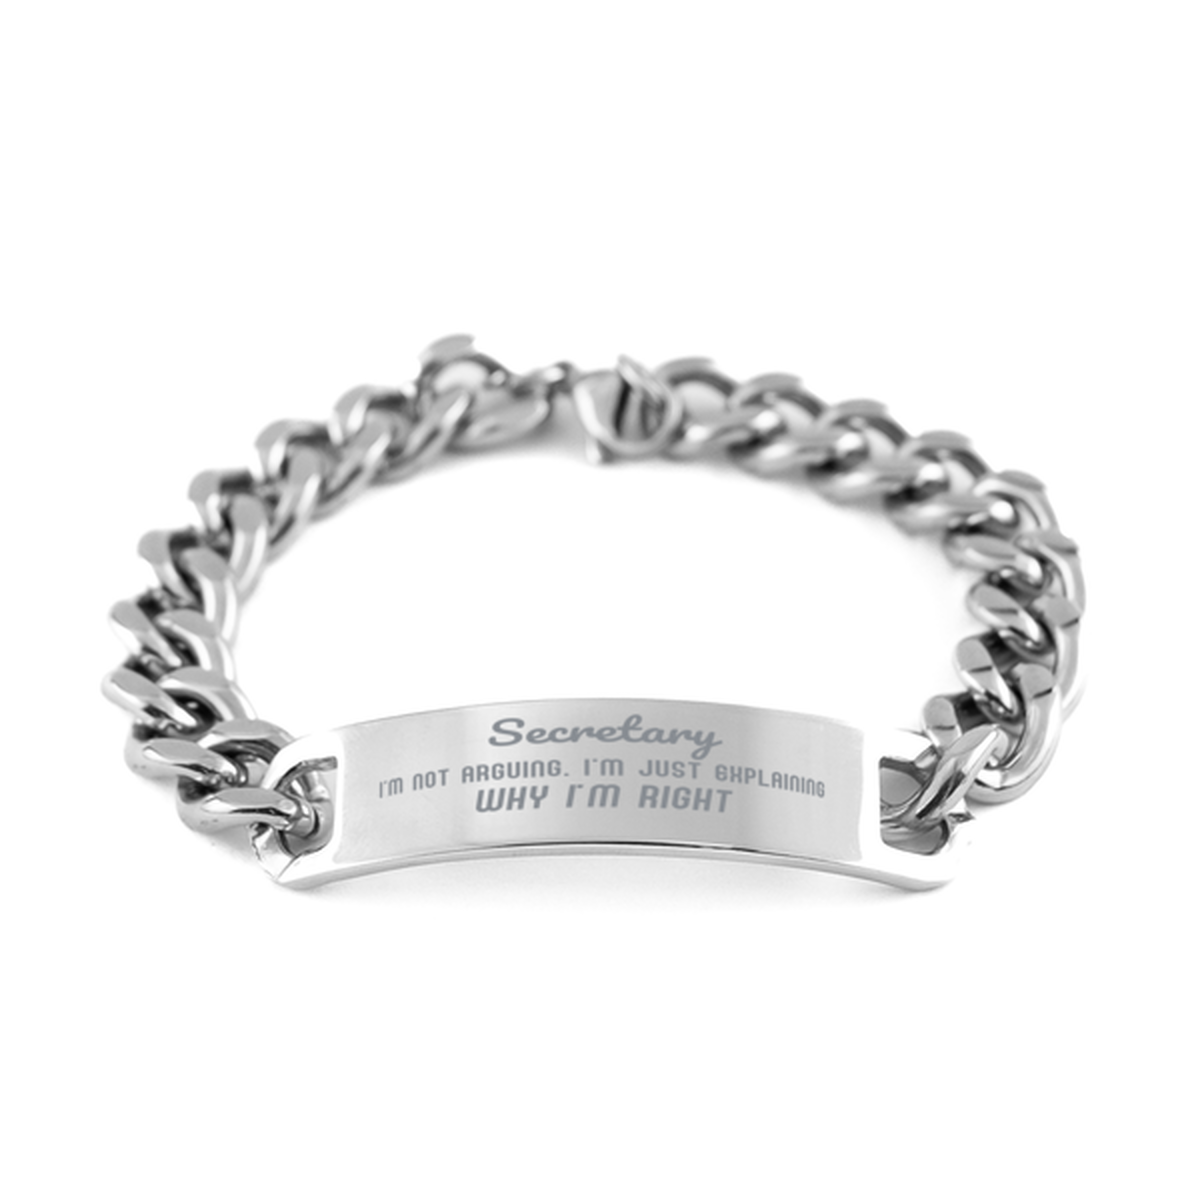 Secretary I'm not Arguing. I'm Just Explaining Why I'm RIGHT Cuban Chain Stainless Steel Bracelet, Graduation Birthday Christmas Secretary Gifts For Secretary Funny Saying Quote Present for Men Women Coworker